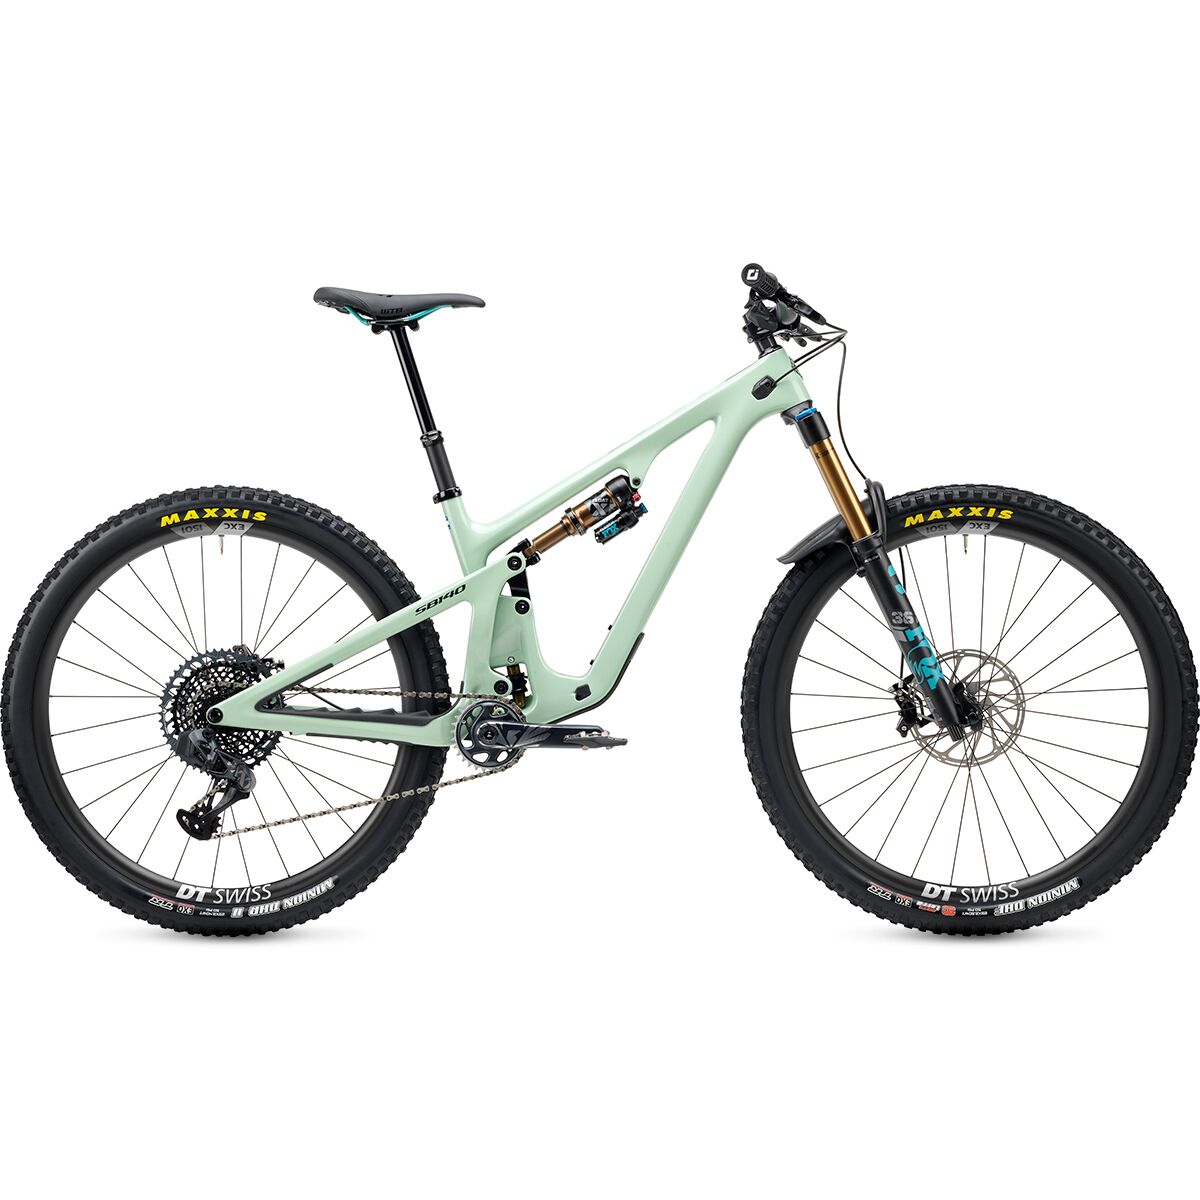 Yeti Cycles SB140 T3 TLR X01 Eagle AXS 29in Carbon Wheels Mountain Bike